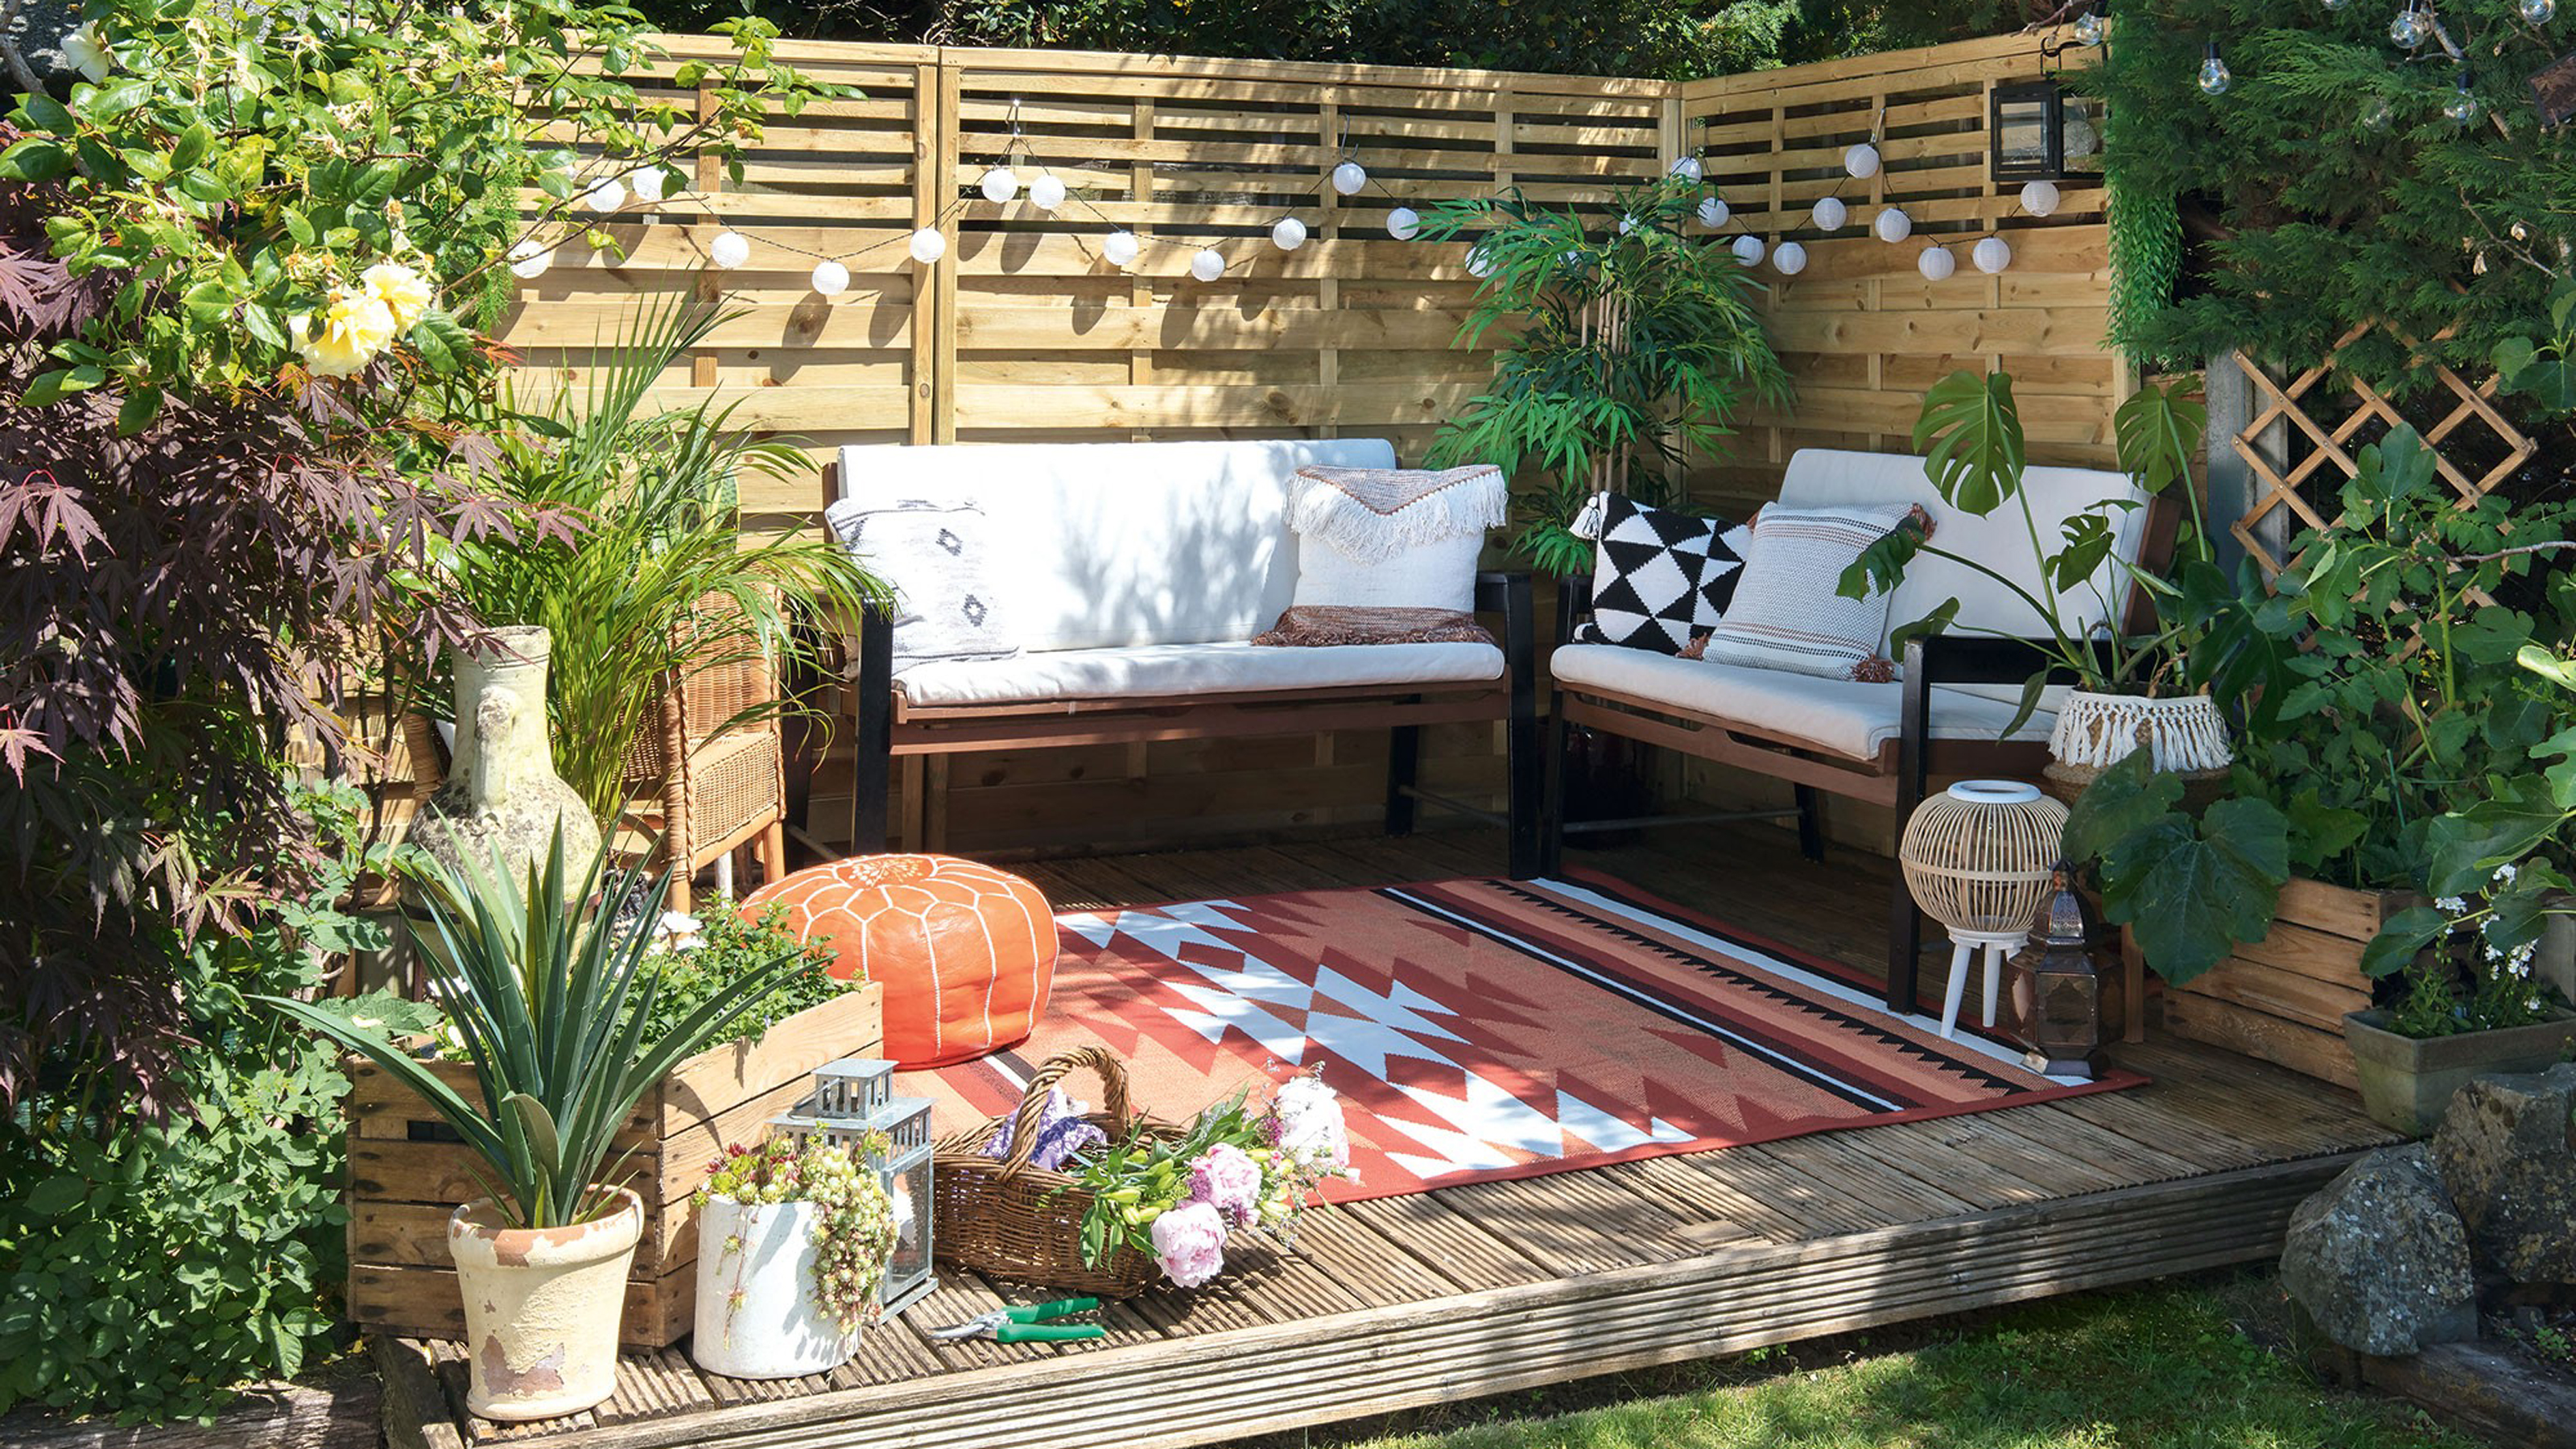 Small garden ideas to make the most of your outdoor space | Ideal Home